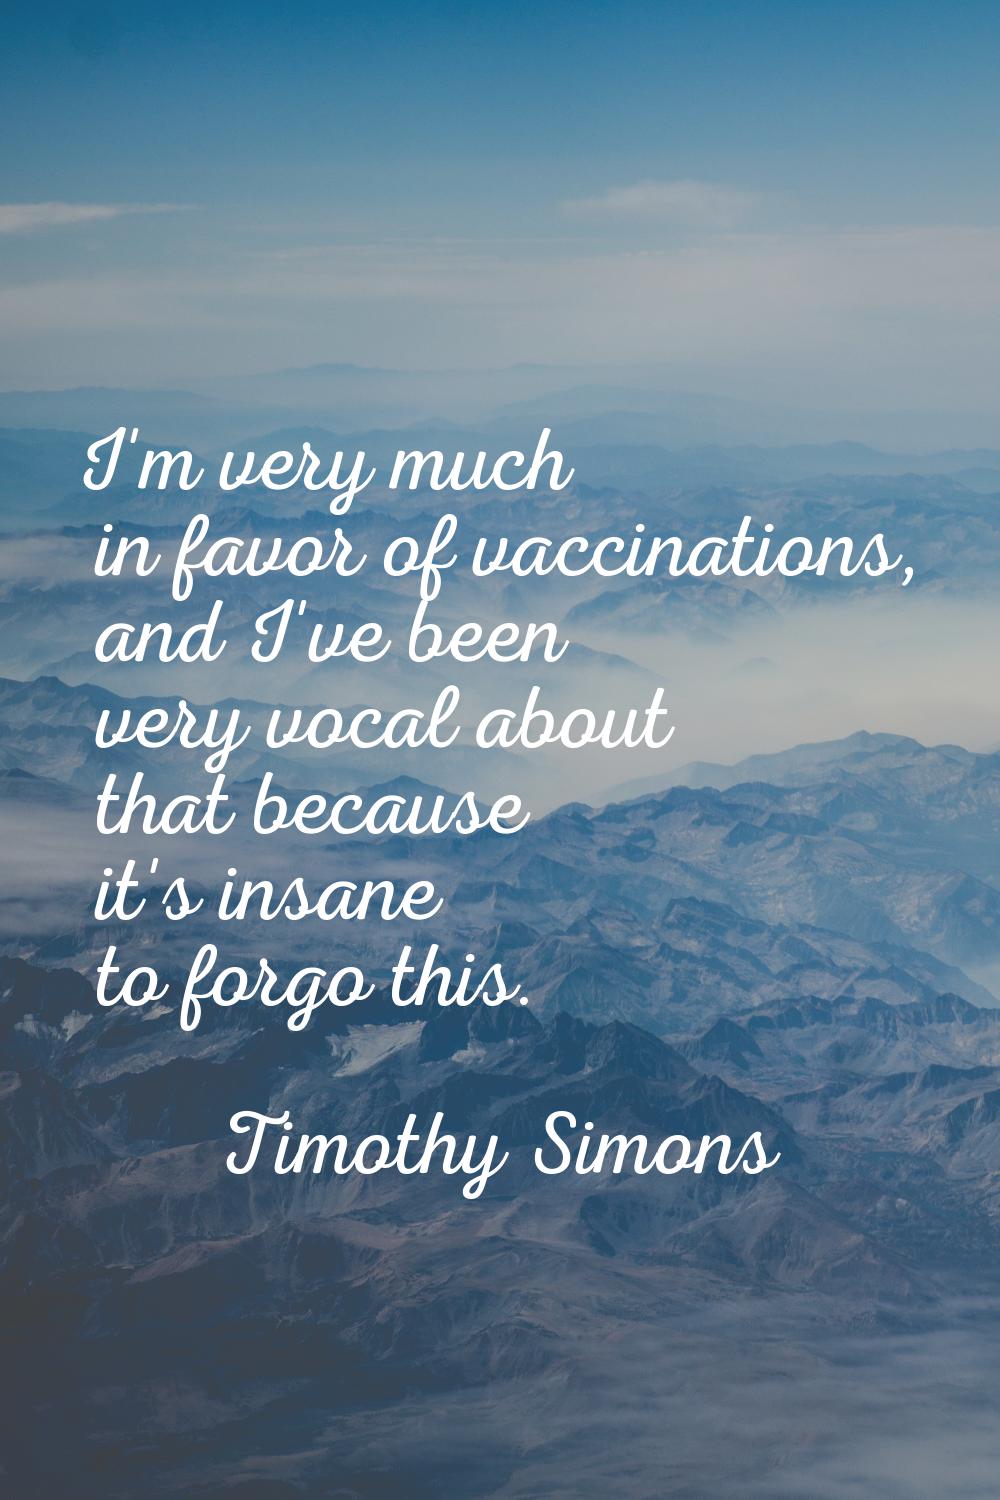 I'm very much in favor of vaccinations, and I've been very vocal about that because it's insane to 